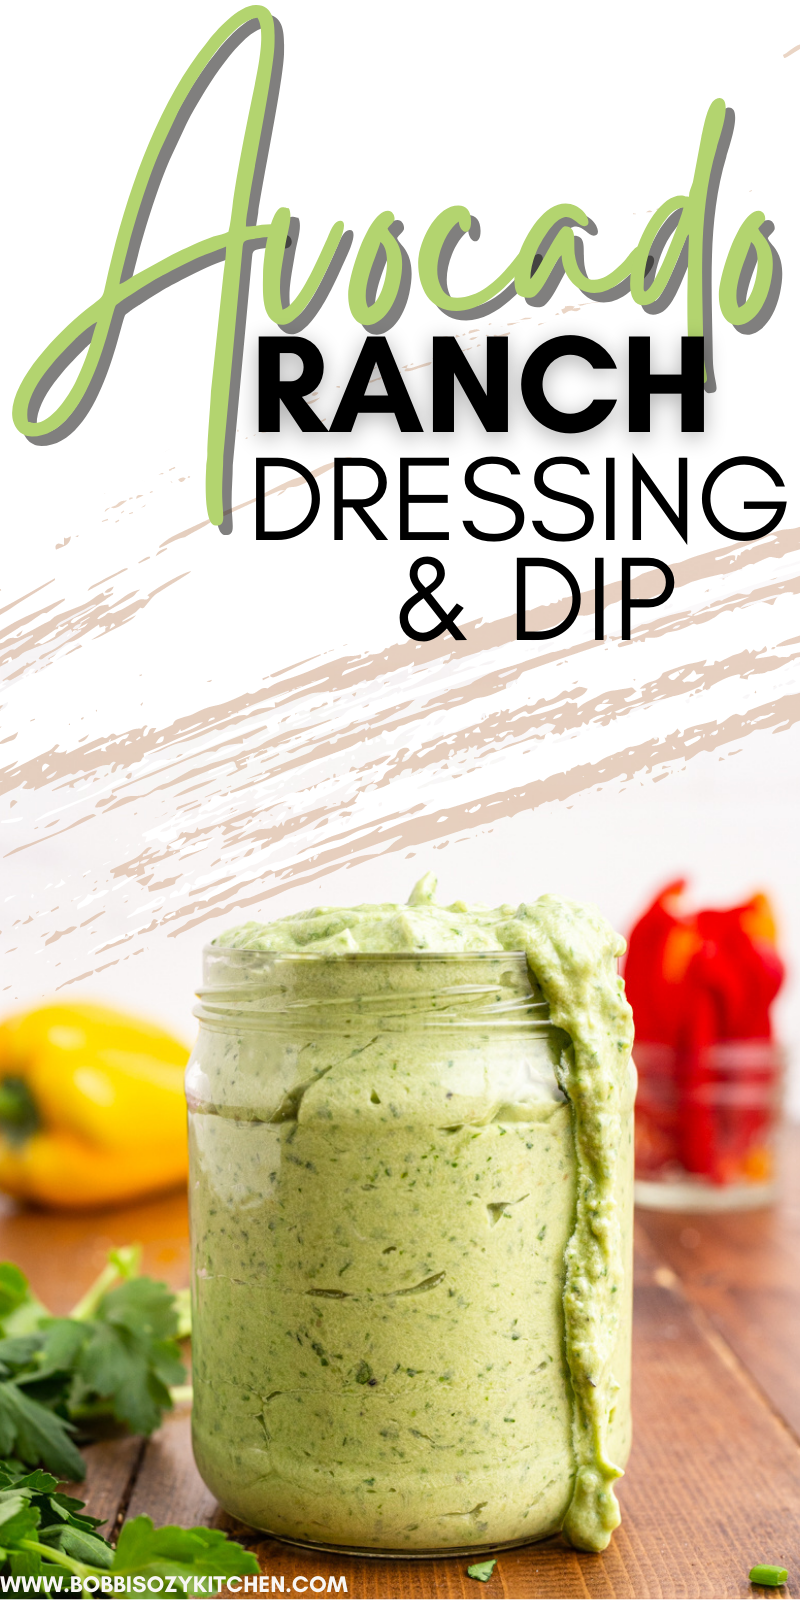 Avocado Ranch Dressing and Dip - This Avocado Ranch Dressing and Dip recipe is creamy and delicious as a dip for veggies, salad dressing, or even a sauce or topping for sandwiches or tacos, with the bonus of being keto, whole30, paleo, gluten-free, and has a dairy-free option as well! #keto #lowcarb #whole30 #Paleo #dairyfree #vegan #Plantbased #avocado #ranch #dressing #salad #dip #easy #recipe